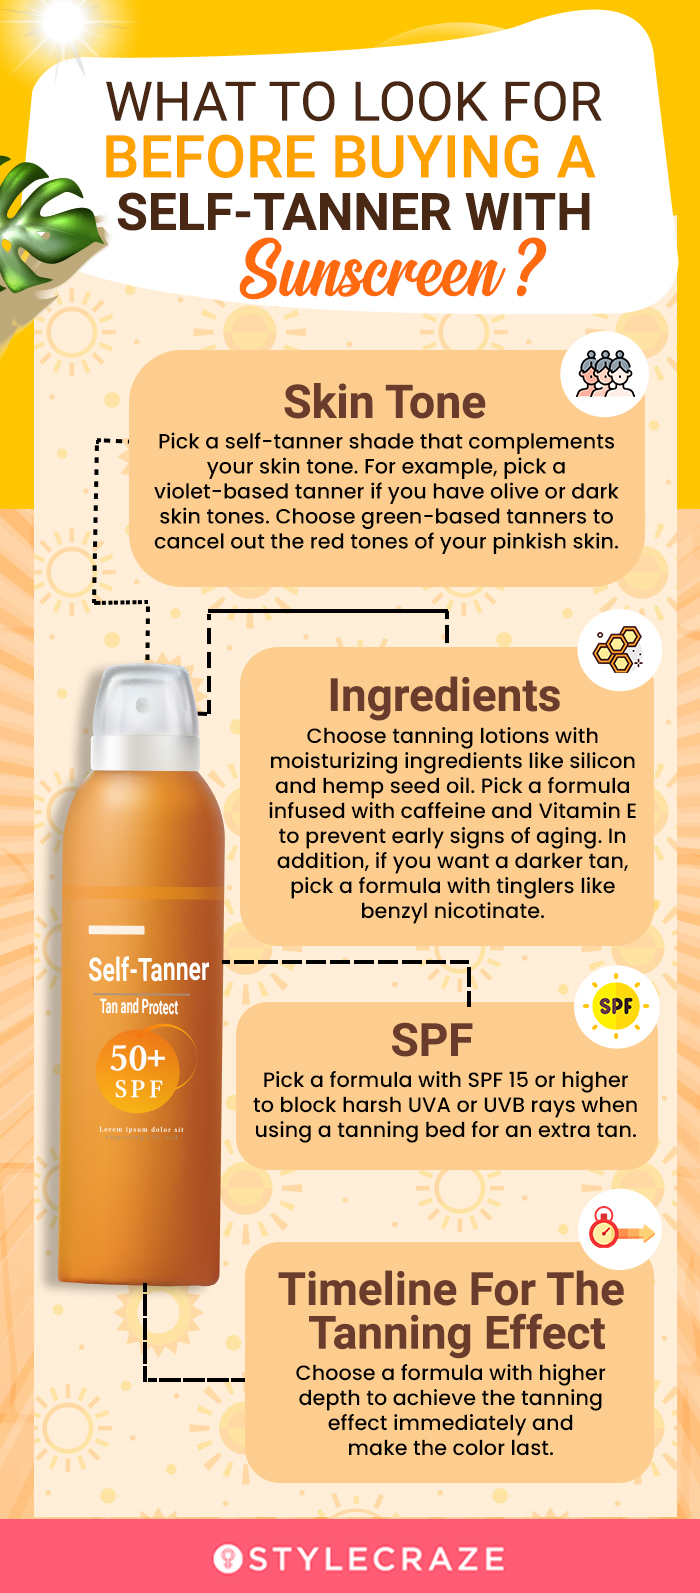 What To Look For Before Buying A Self-Tanner With Sunscreen? (infographic)